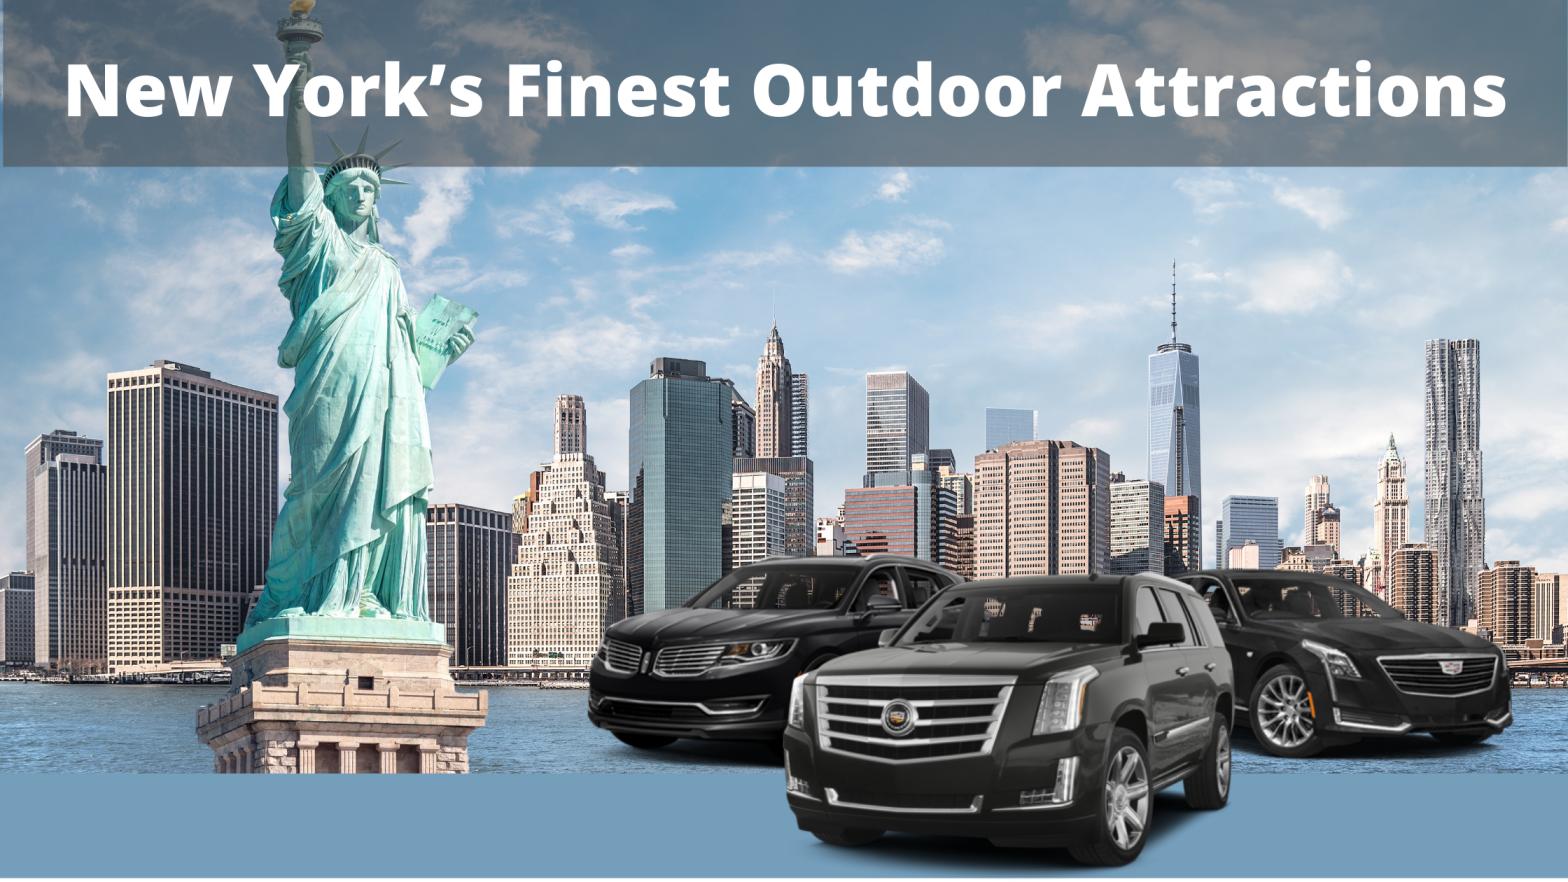 New York’s Finest Outdoor Attractions